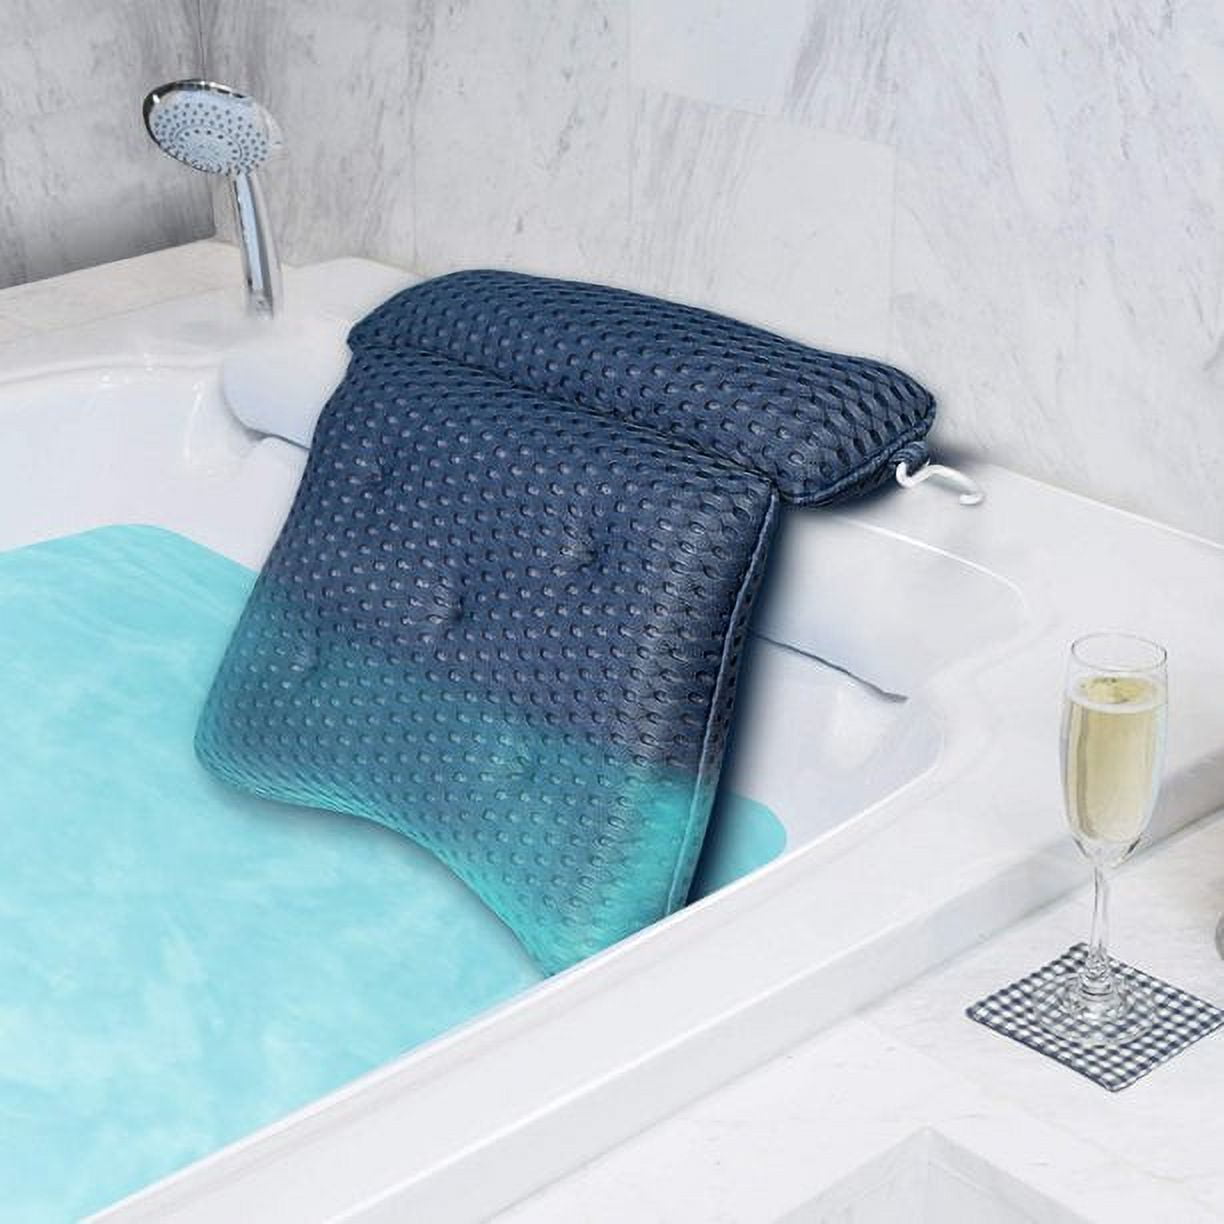 Kowaku Full Body Bath Pillow Mat Non-Slip Luxury Spa Bath CushionBath Pillows for Tub Neck and Back Support, Large Suction Cups Comfort Head Rest,Breathable